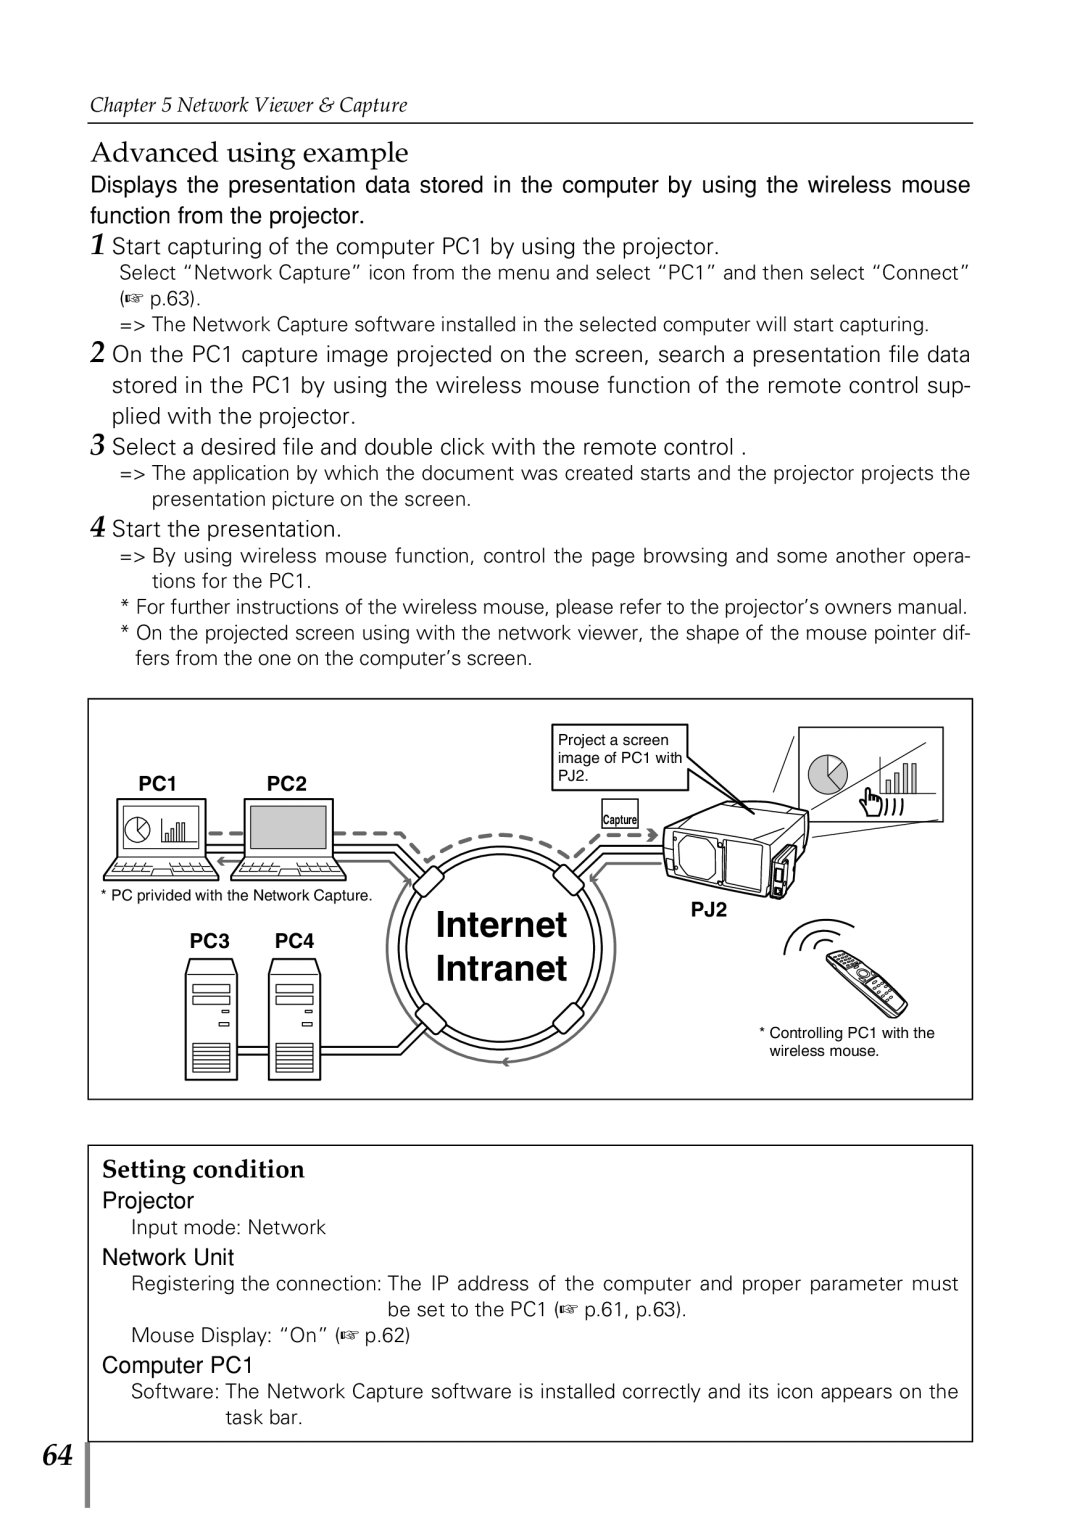 Eiki PjNET-20 Internet Intranet, Advanced using example, Setting condition, Projector, Network Unit, Computer PC1, PC1 PC2 